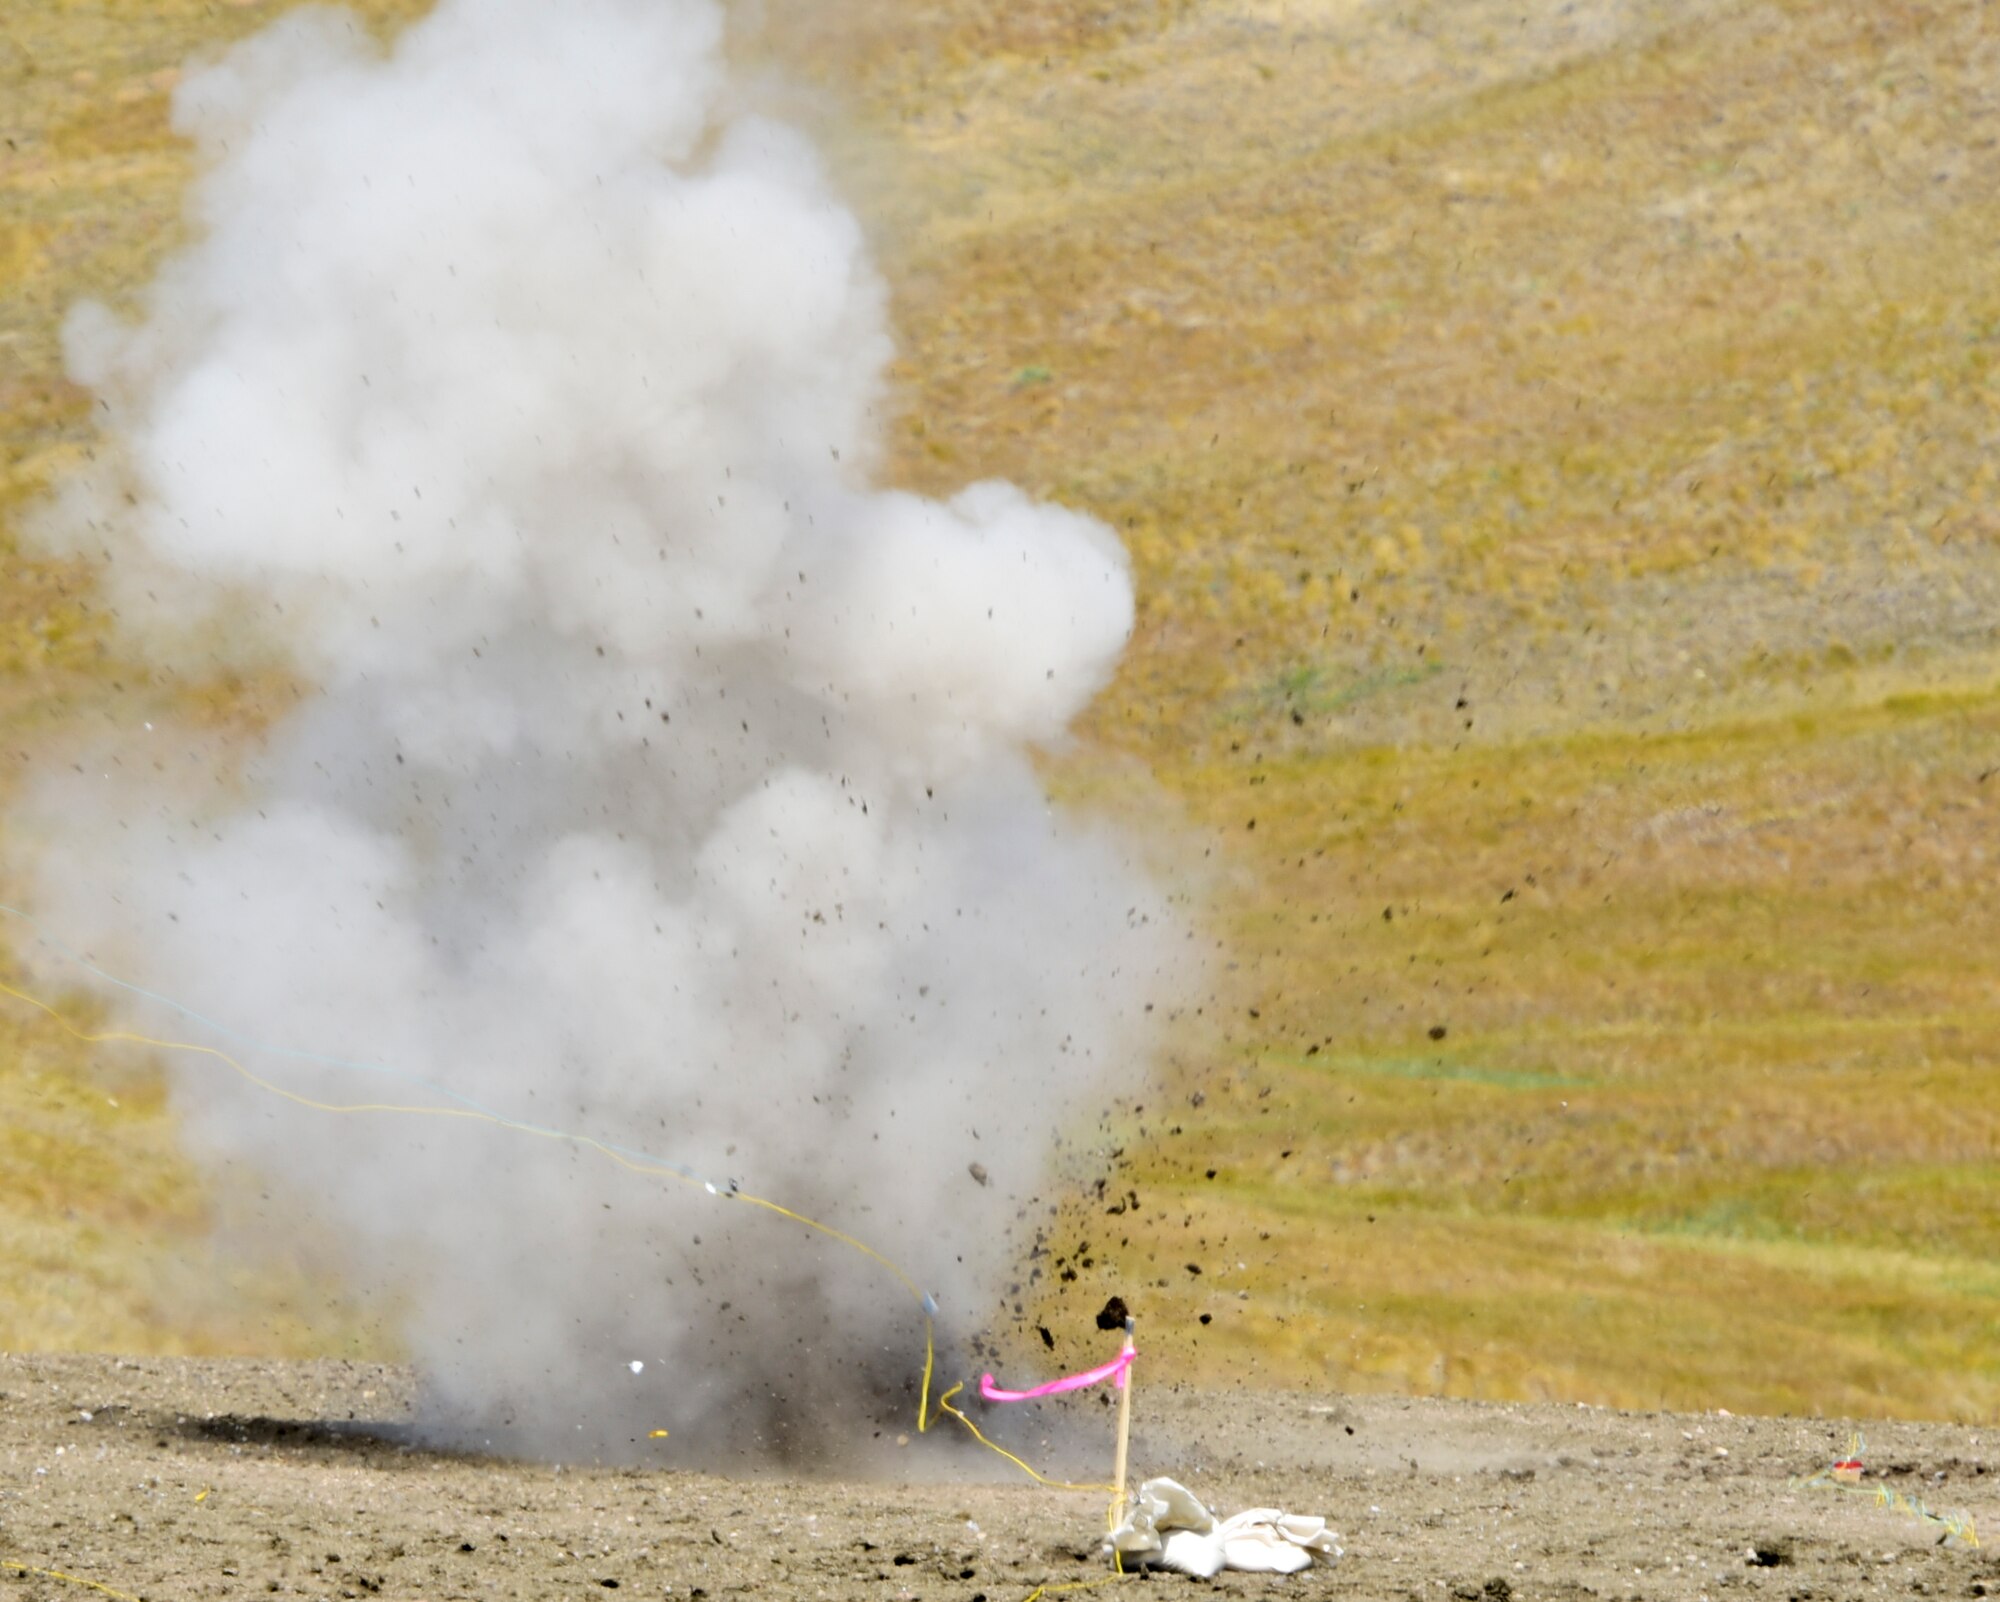 A homemade explosive detonates during a National Improvised Explosive Familiarization course at Ellsworth Air Force Base, S.D., July 12, 2017. The three-day, FBI-led, joint exercise taught 28th Civil Engineer Squadron Explosive Ordinance Disposal Airmen, along with other law enforcement agencies, how to create and recognize Homemade Explosives. (U.S. Air Force photo by Airman 1st Class Randahl J. Jenson)